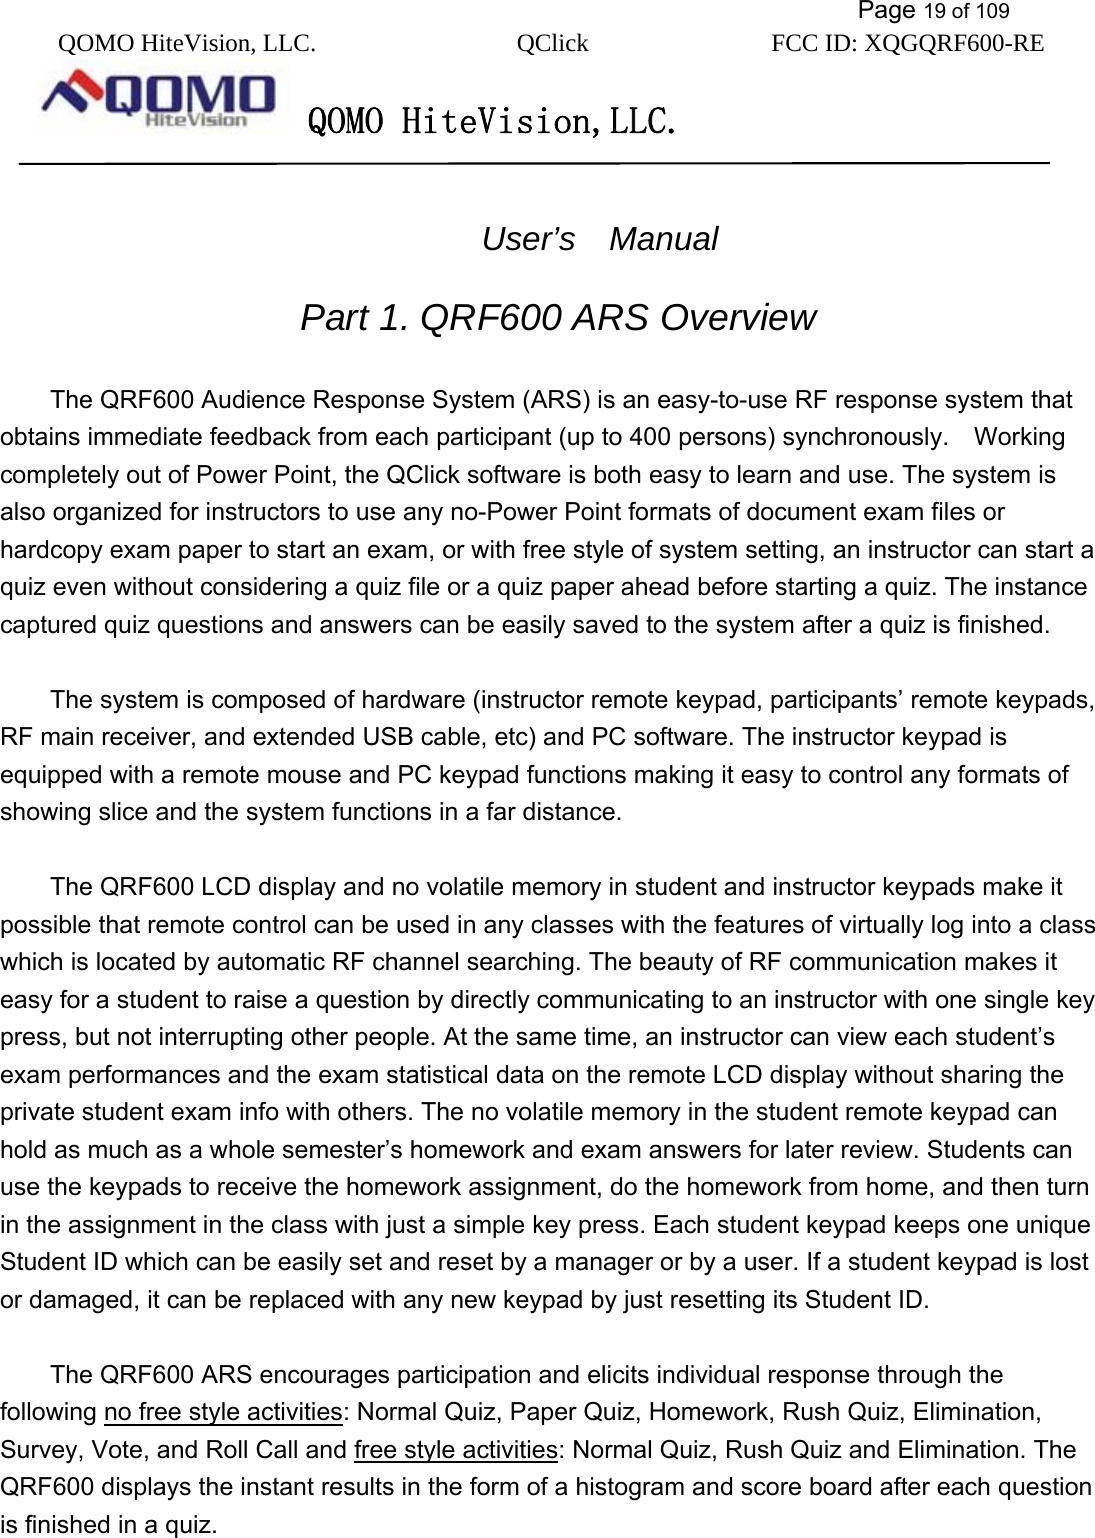           Page 19 of 109 QOMO HiteVision, LLC.  QClick        FCC ID: XQGQRF600-RE     QOMO HiteVision,LLC.      User’s  Manual  Part 1. QRF600 ARS Overview  The QRF600 Audience Response System (ARS) is an easy-to-use RF response system that obtains immediate feedback from each participant (up to 400 persons) synchronously.    Working completely out of Power Point, the QClick software is both easy to learn and use. The system is also organized for instructors to use any no-Power Point formats of document exam files or hardcopy exam paper to start an exam, or with free style of system setting, an instructor can start a quiz even without considering a quiz file or a quiz paper ahead before starting a quiz. The instance captured quiz questions and answers can be easily saved to the system after a quiz is finished.  The system is composed of hardware (instructor remote keypad, participants’ remote keypads, RF main receiver, and extended USB cable, etc) and PC software. The instructor keypad is equipped with a remote mouse and PC keypad functions making it easy to control any formats of showing slice and the system functions in a far distance.  The QRF600 LCD display and no volatile memory in student and instructor keypads make it possible that remote control can be used in any classes with the features of virtually log into a class which is located by automatic RF channel searching. The beauty of RF communication makes it easy for a student to raise a question by directly communicating to an instructor with one single key press, but not interrupting other people. At the same time, an instructor can view each student’s exam performances and the exam statistical data on the remote LCD display without sharing the private student exam info with others. The no volatile memory in the student remote keypad can hold as much as a whole semester’s homework and exam answers for later review. Students can use the keypads to receive the homework assignment, do the homework from home, and then turn in the assignment in the class with just a simple key press. Each student keypad keeps one unique Student ID which can be easily set and reset by a manager or by a user. If a student keypad is lost or damaged, it can be replaced with any new keypad by just resetting its Student ID.  The QRF600 ARS encourages participation and elicits individual response through the following no free style activities: Normal Quiz, Paper Quiz, Homework, Rush Quiz, Elimination, Survey, Vote, and Roll Call and free style activities: Normal Quiz, Rush Quiz and Elimination. The QRF600 displays the instant results in the form of a histogram and score board after each question is finished in a quiz.    